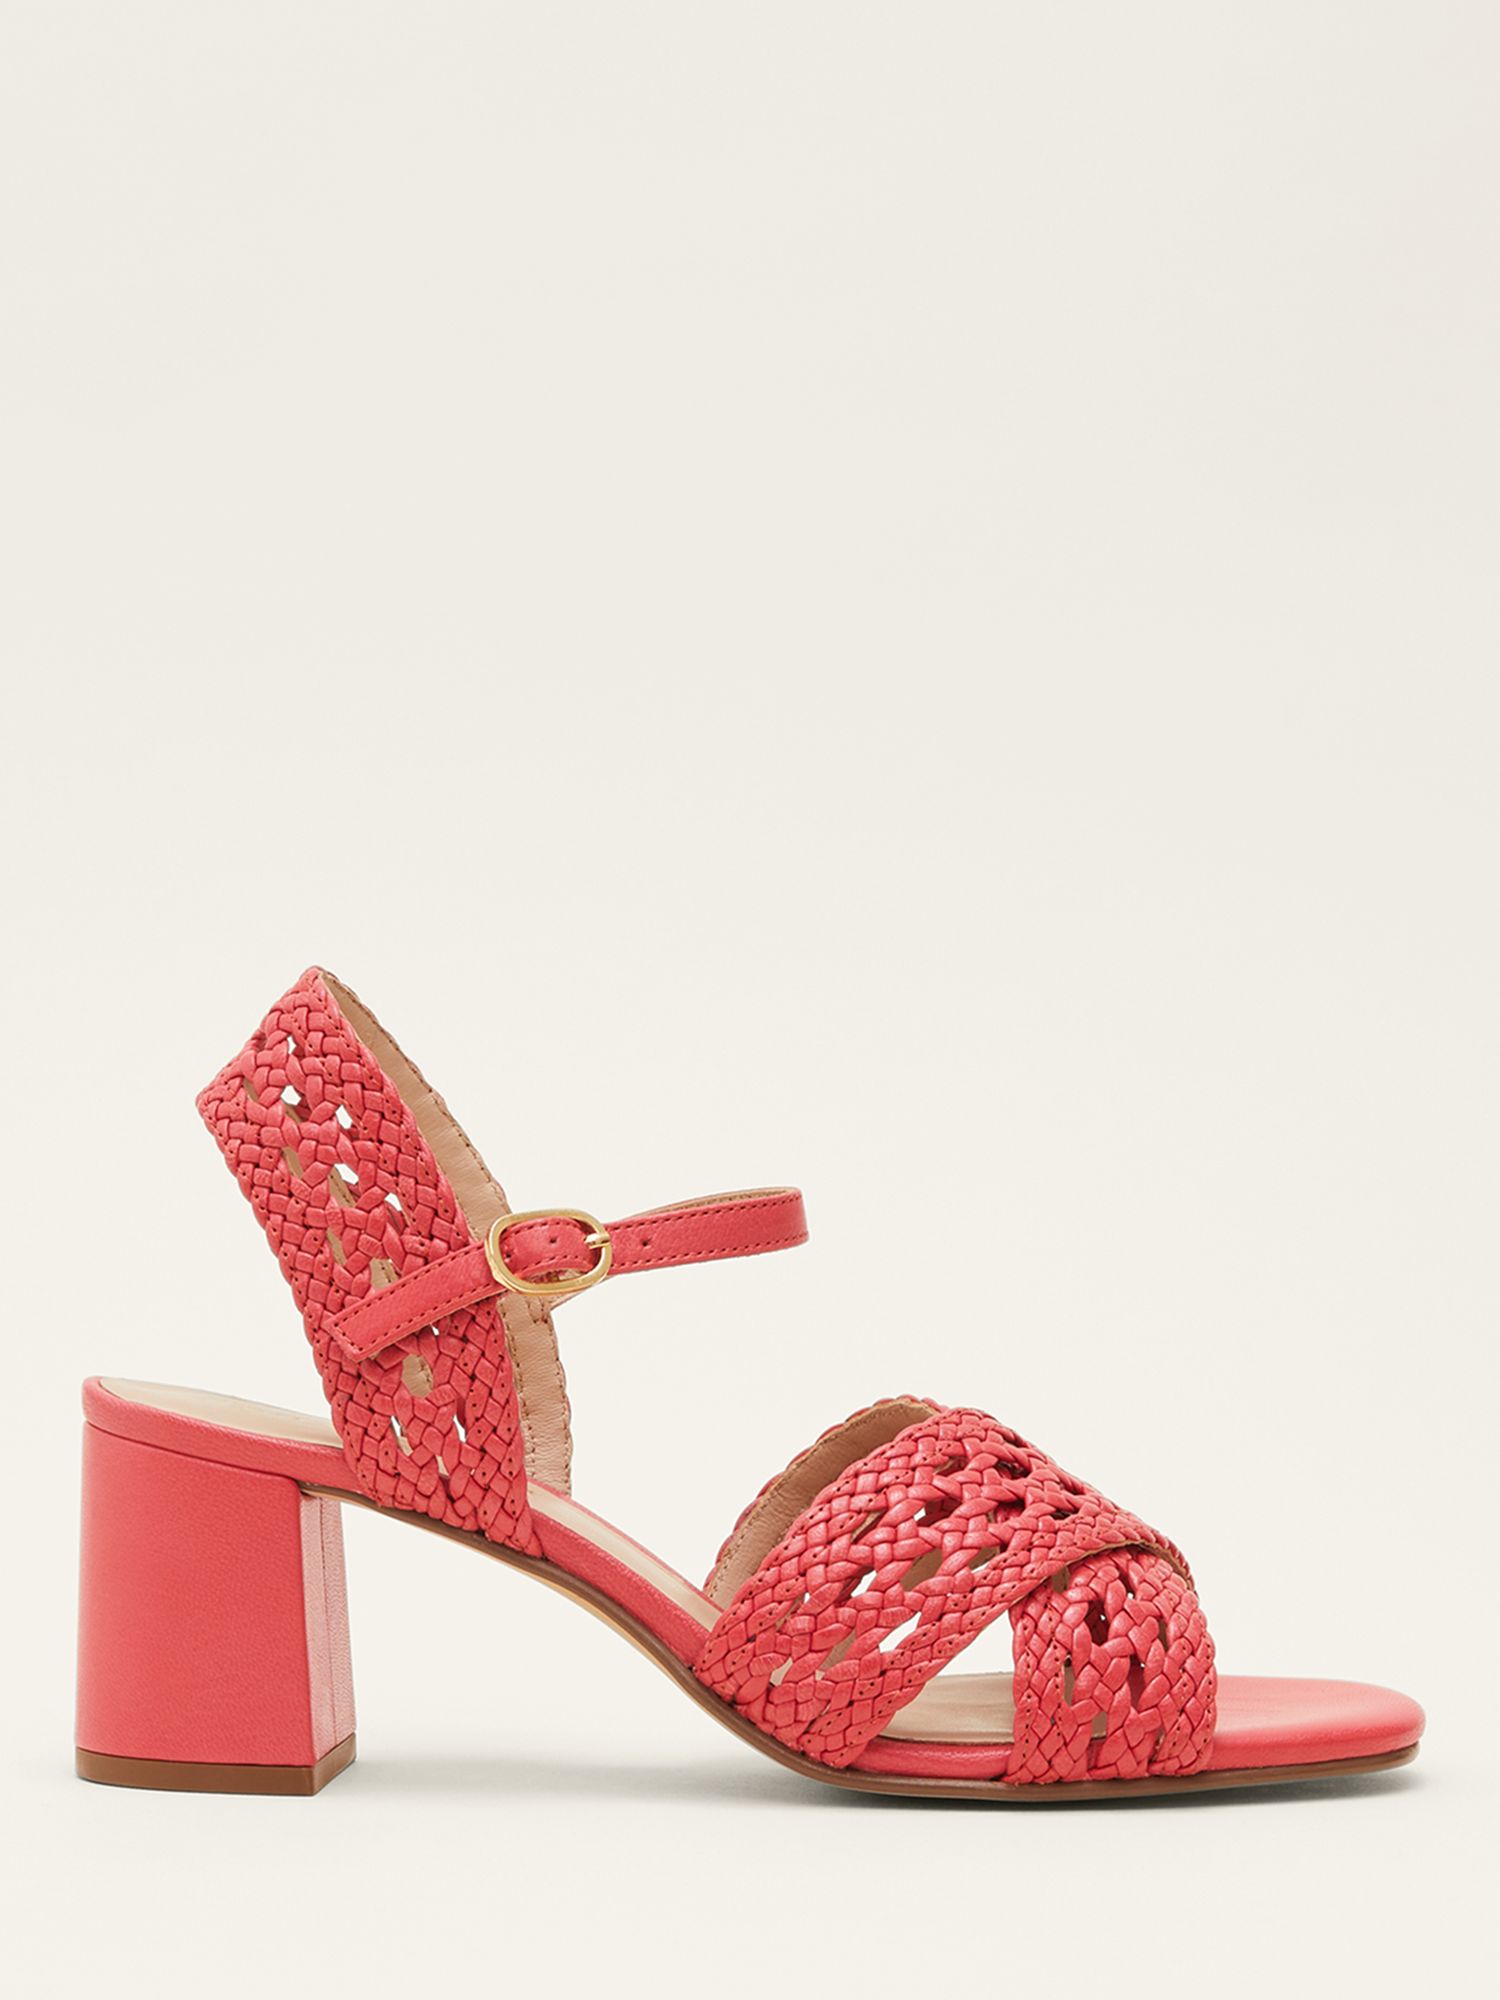 Phase Eight Weave Strap Sandals, Coral